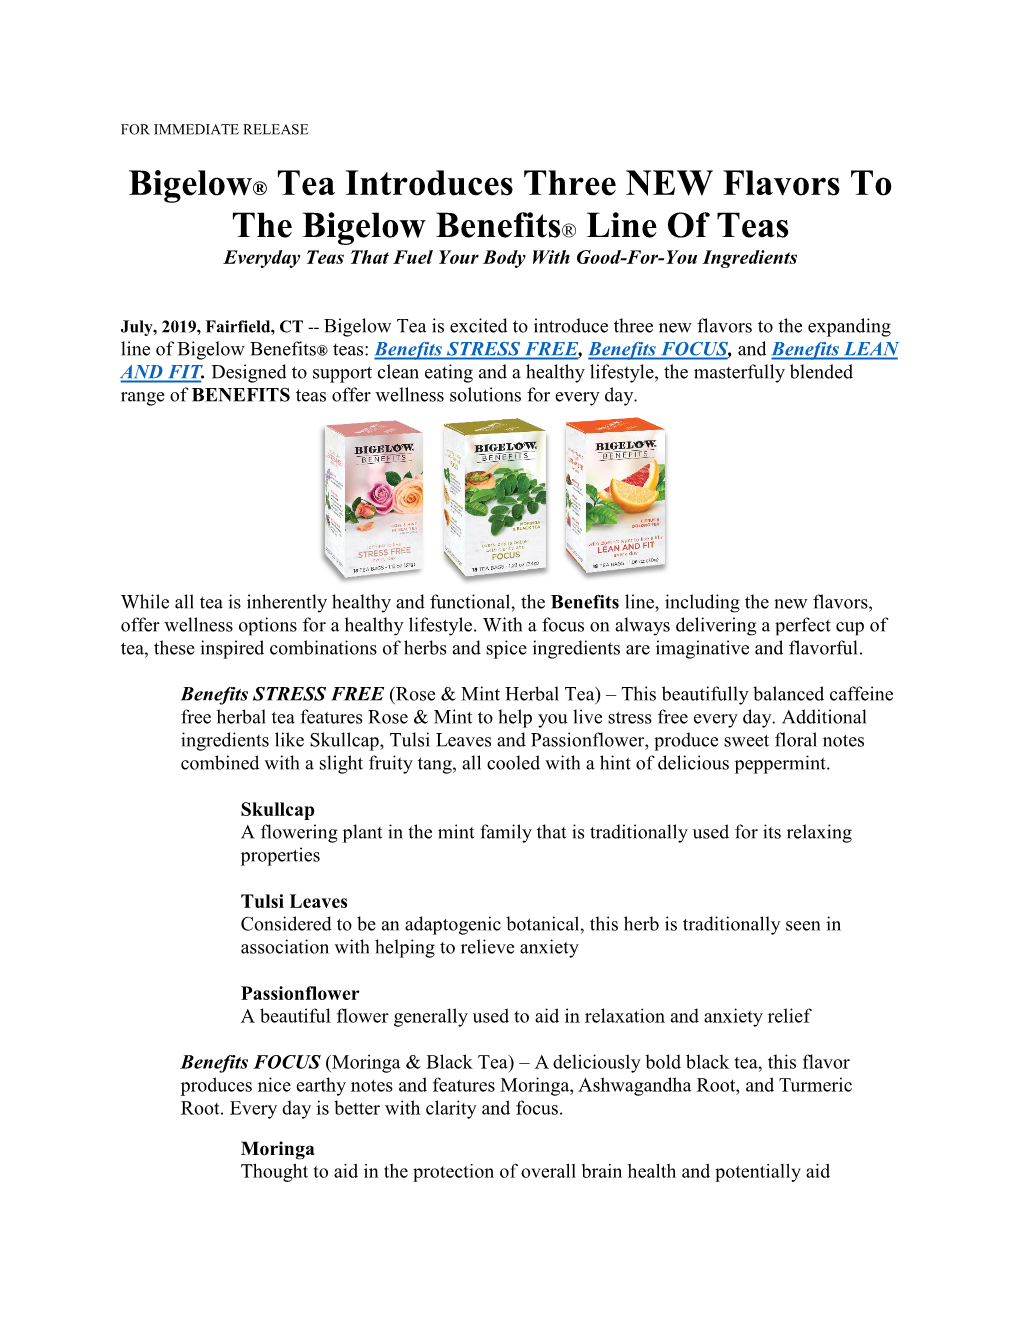 Bigelow® Tea Introduces Three NEW Flavors to the Bigelow Benefits® Line of Teas Everyday Teas That Fuel Your Body with Good-For-You Ingredients